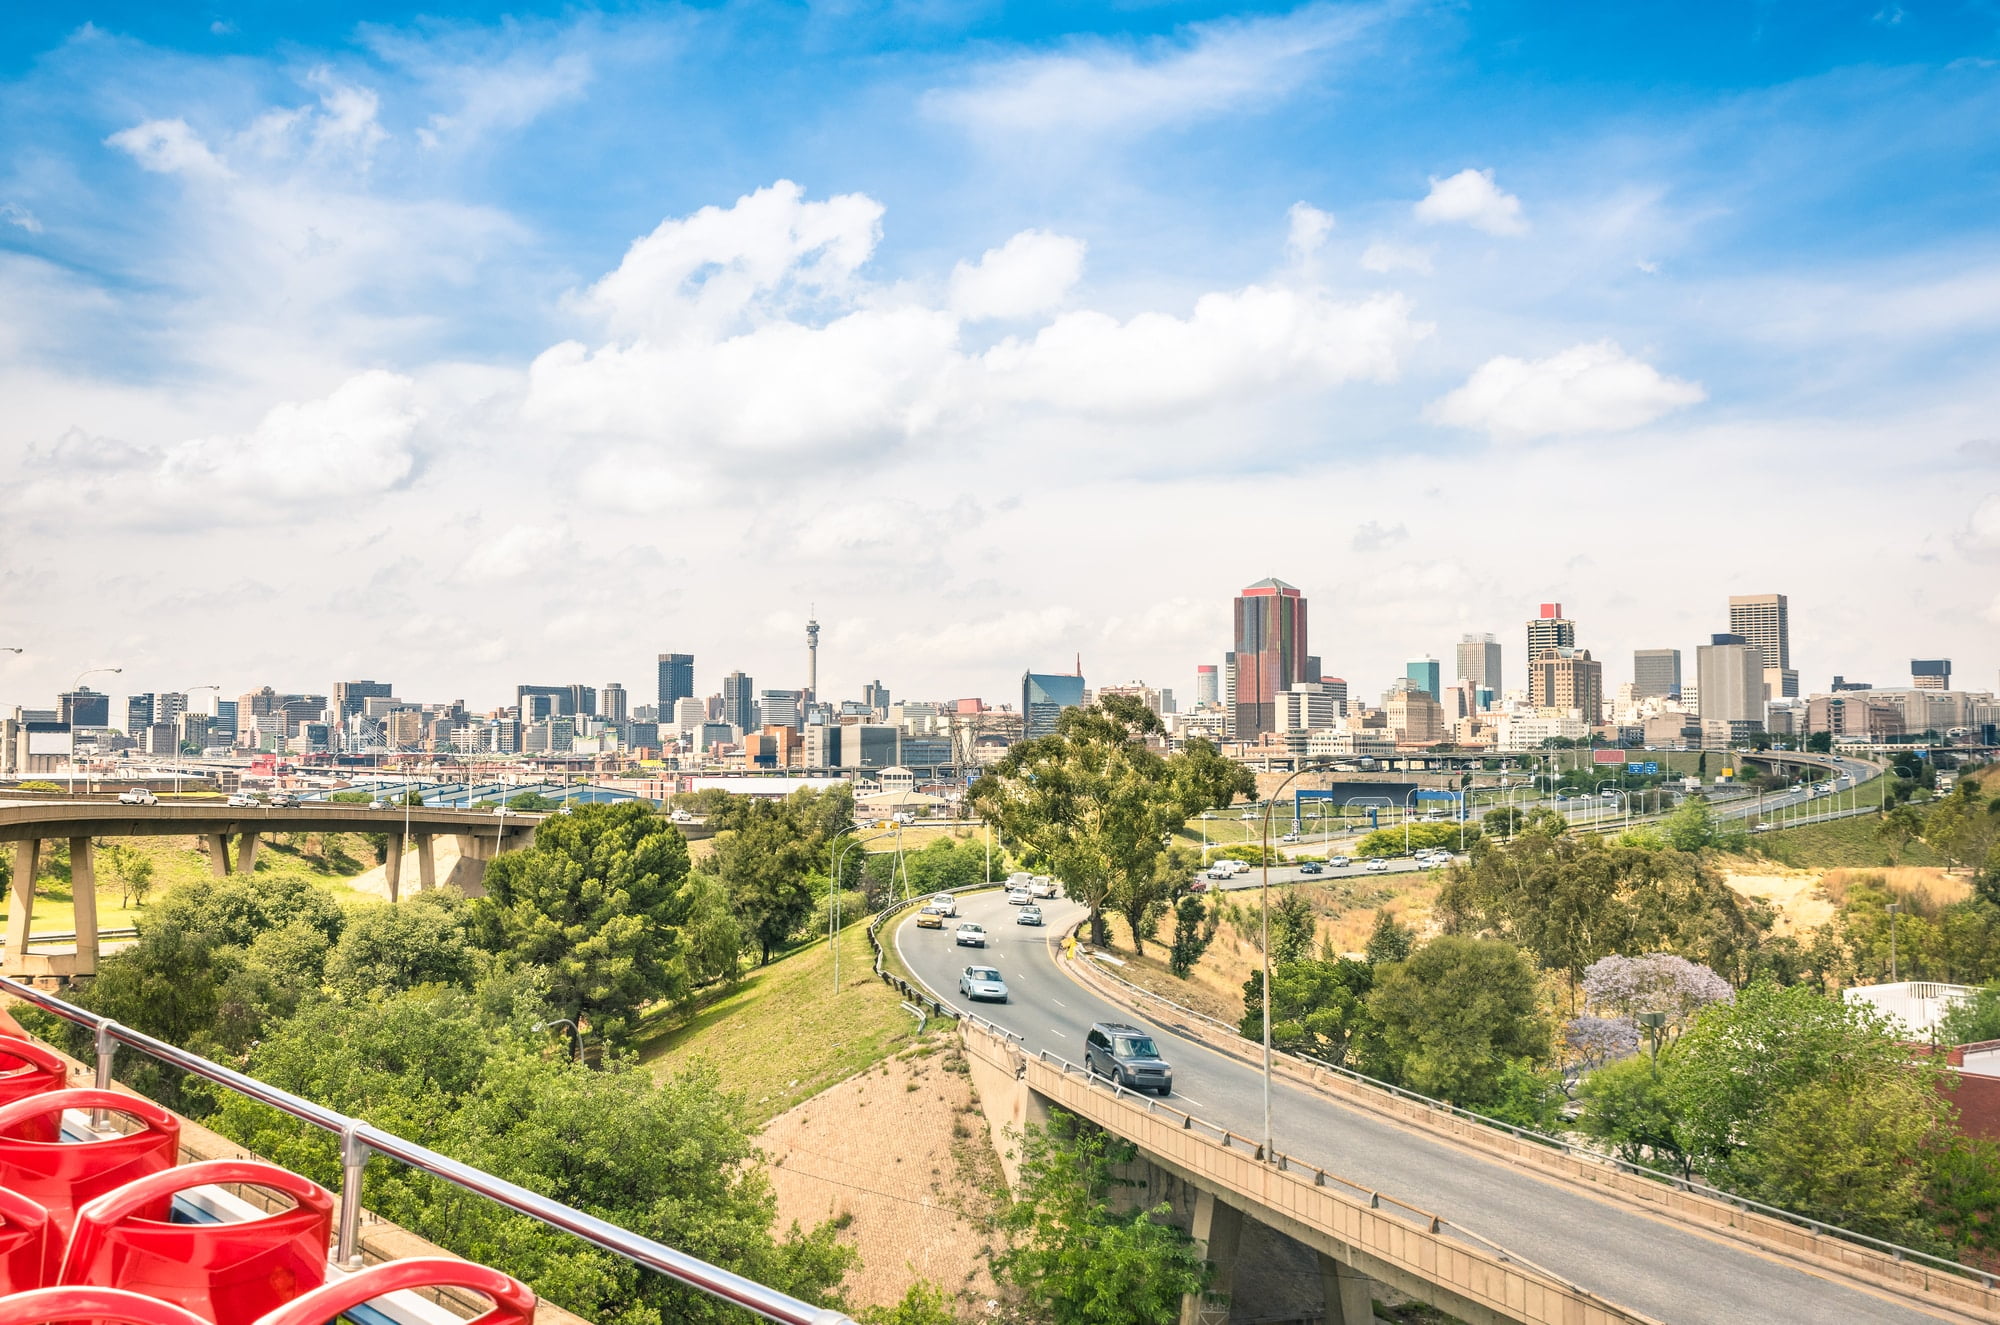 Johannesburg. South Africa, skyline from the highways 